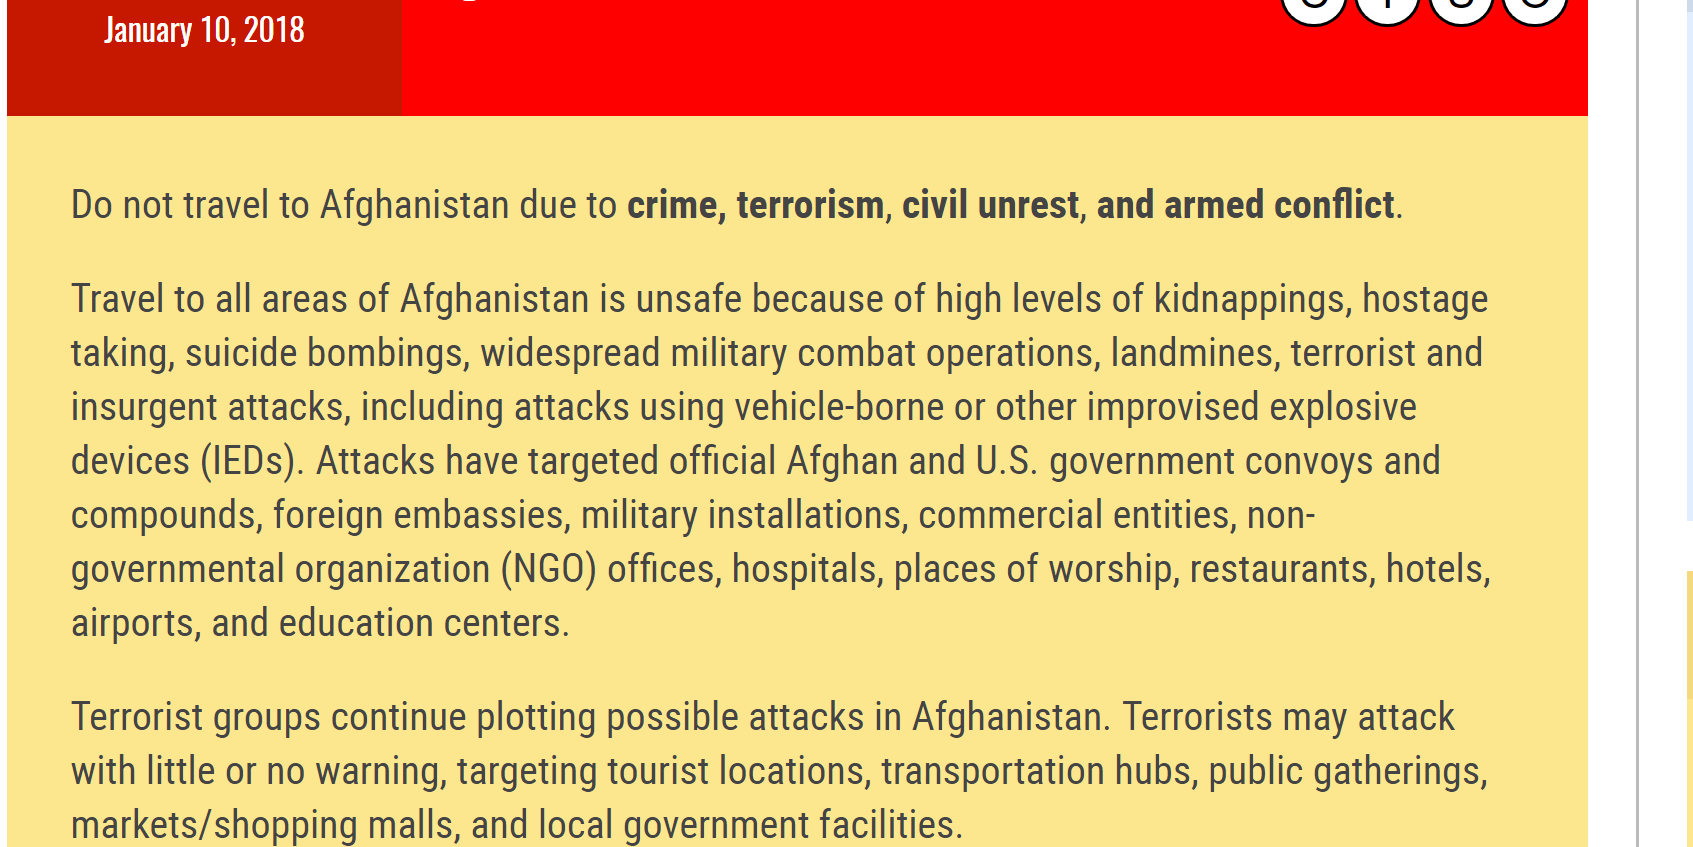 Do not travel to Afghanistan due to crime, terrorism, civil unrest, and armed conflict